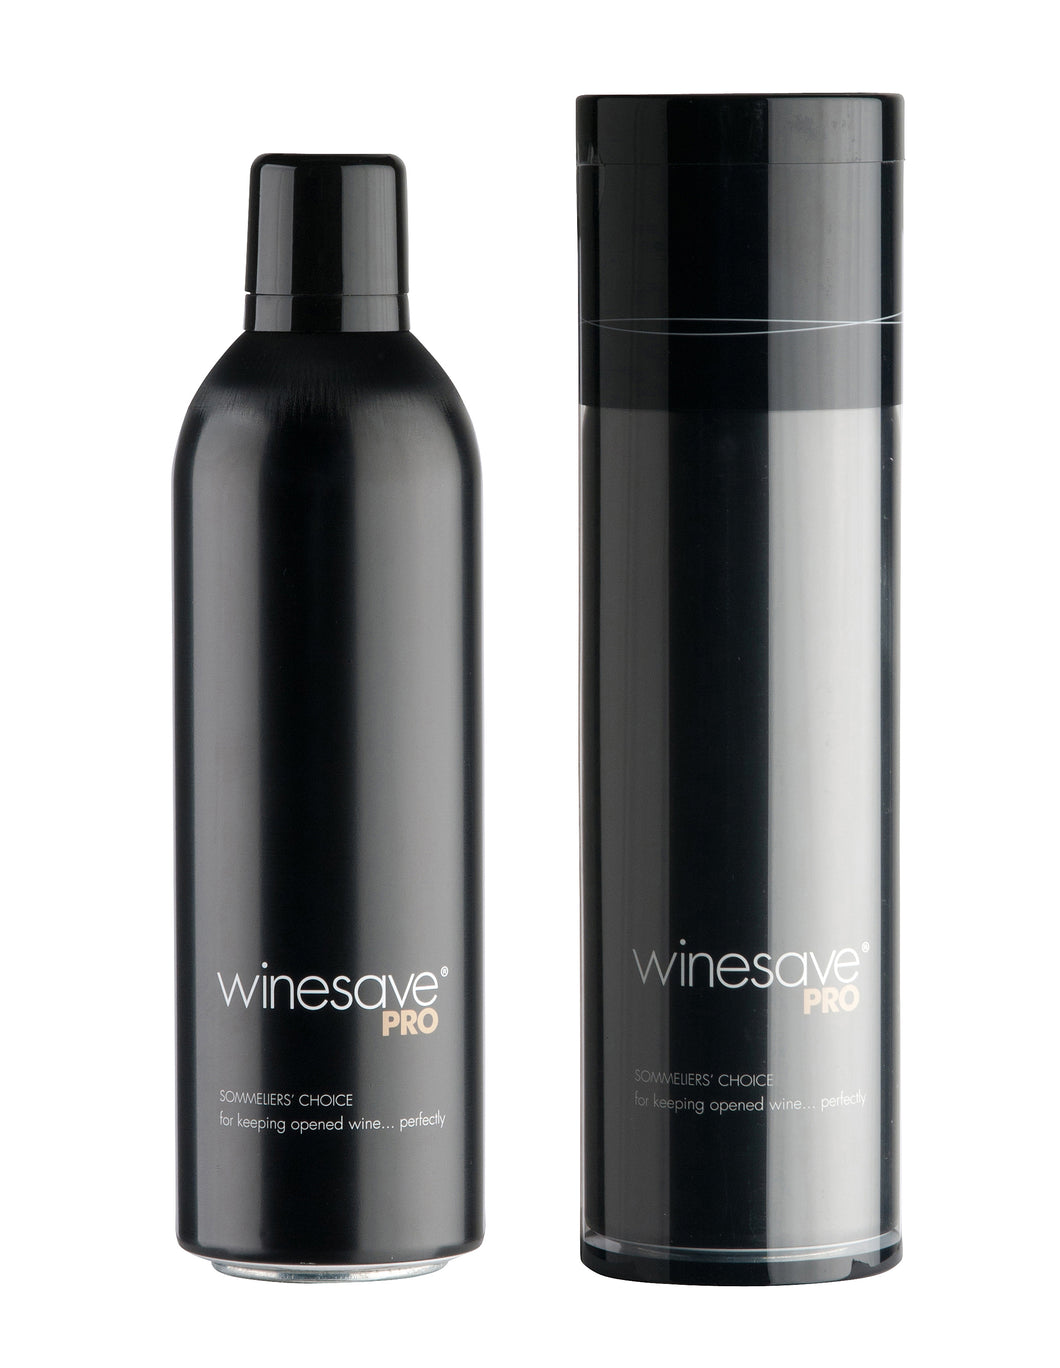 Winesave PRO, premium wine preservation product made with 100% argon gas. Open bottle and packaged bottle. 